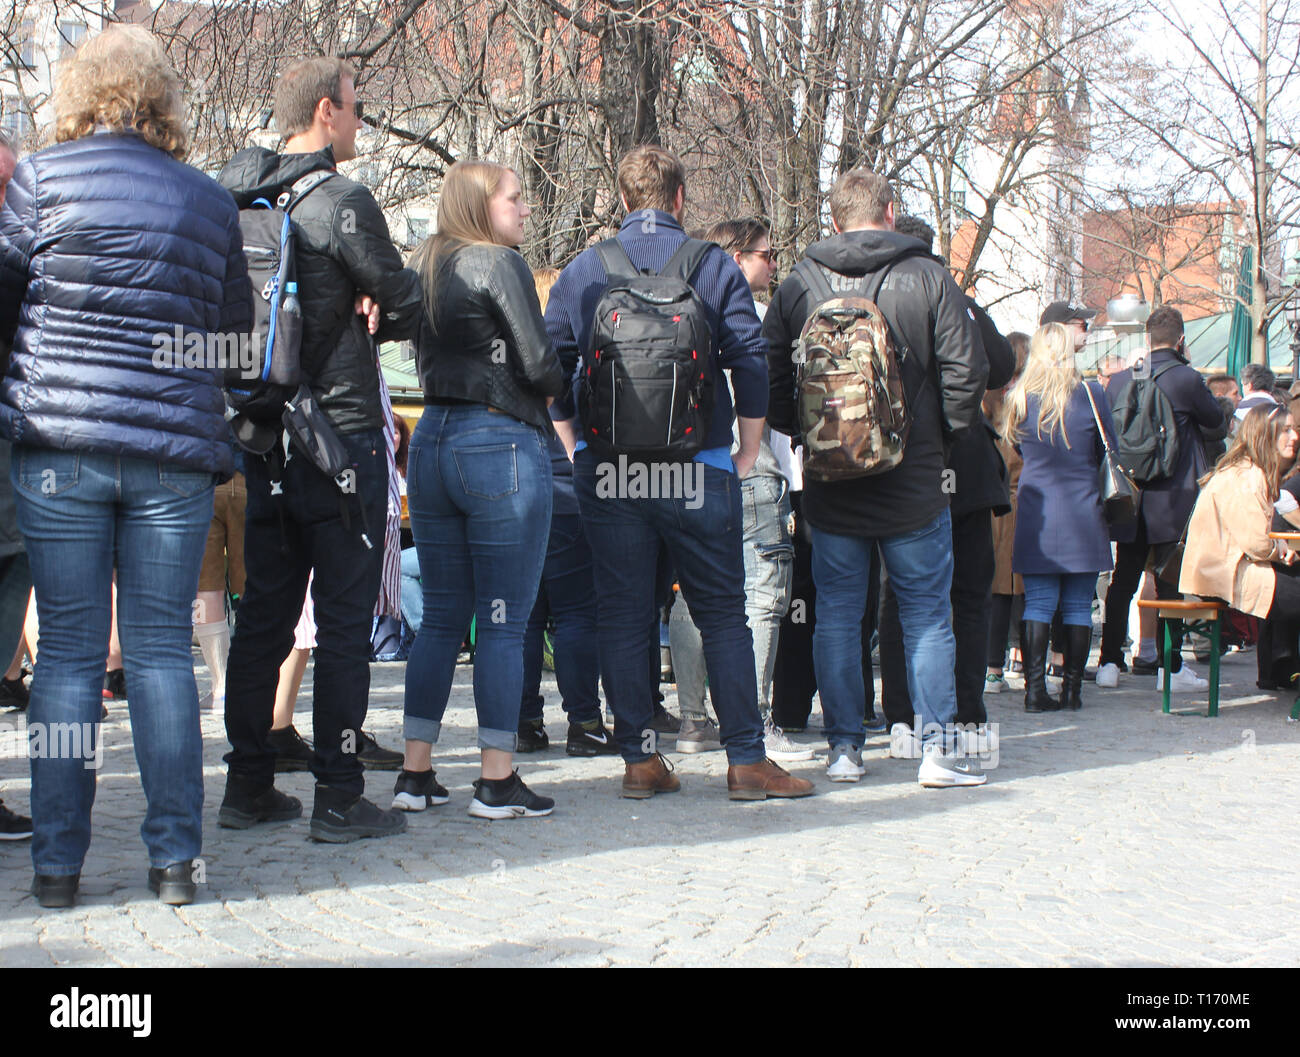 People lining up outside, December, cold season. Stock Photo